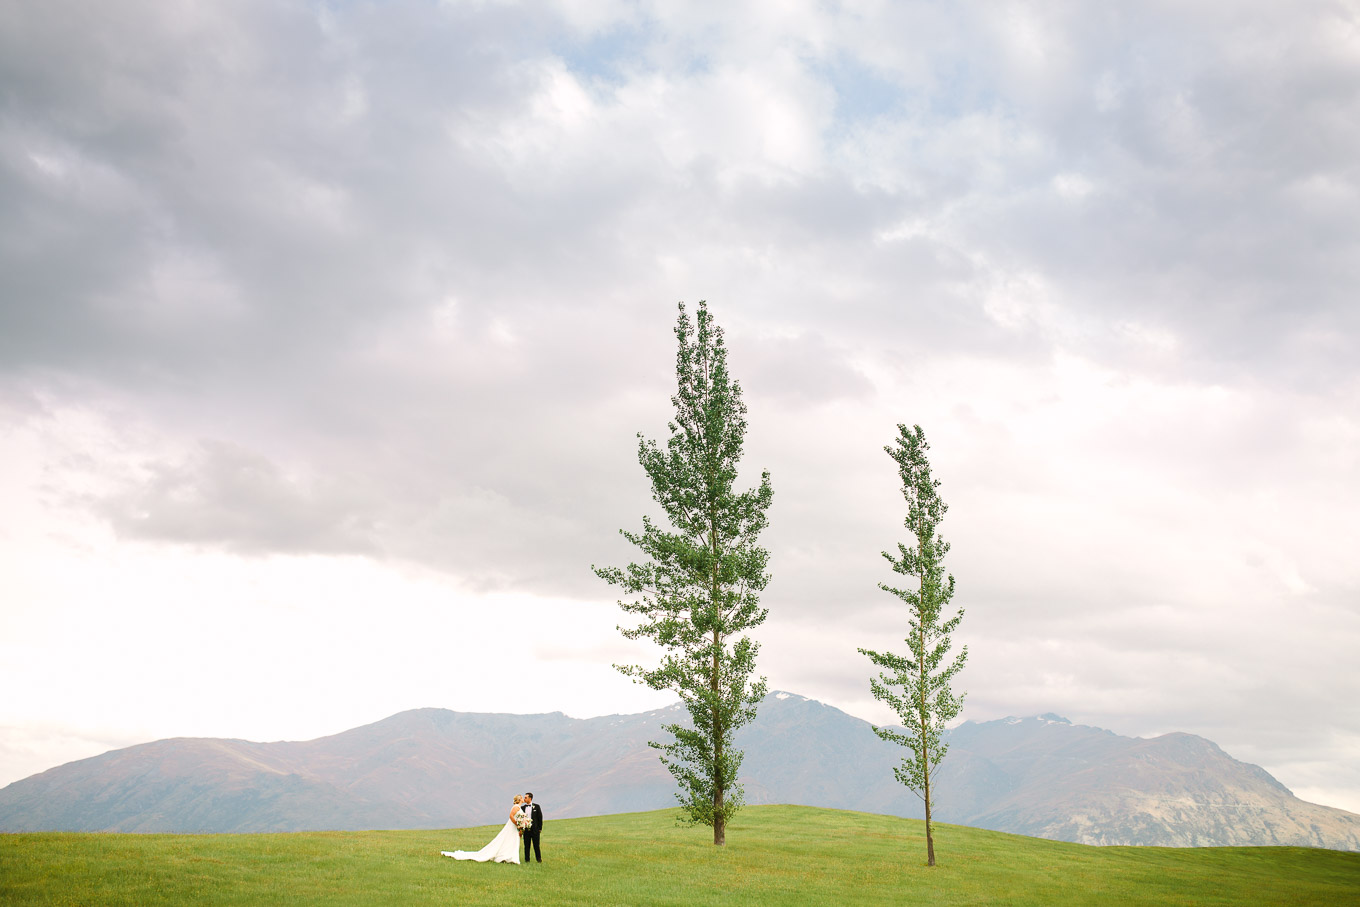 Wedding portrait with two trees on a hillside with Southern Alps in the background. Millbrook Resort Queenstown New Zealand wedding by Mary Costa Photography | www.marycostaweddings.com